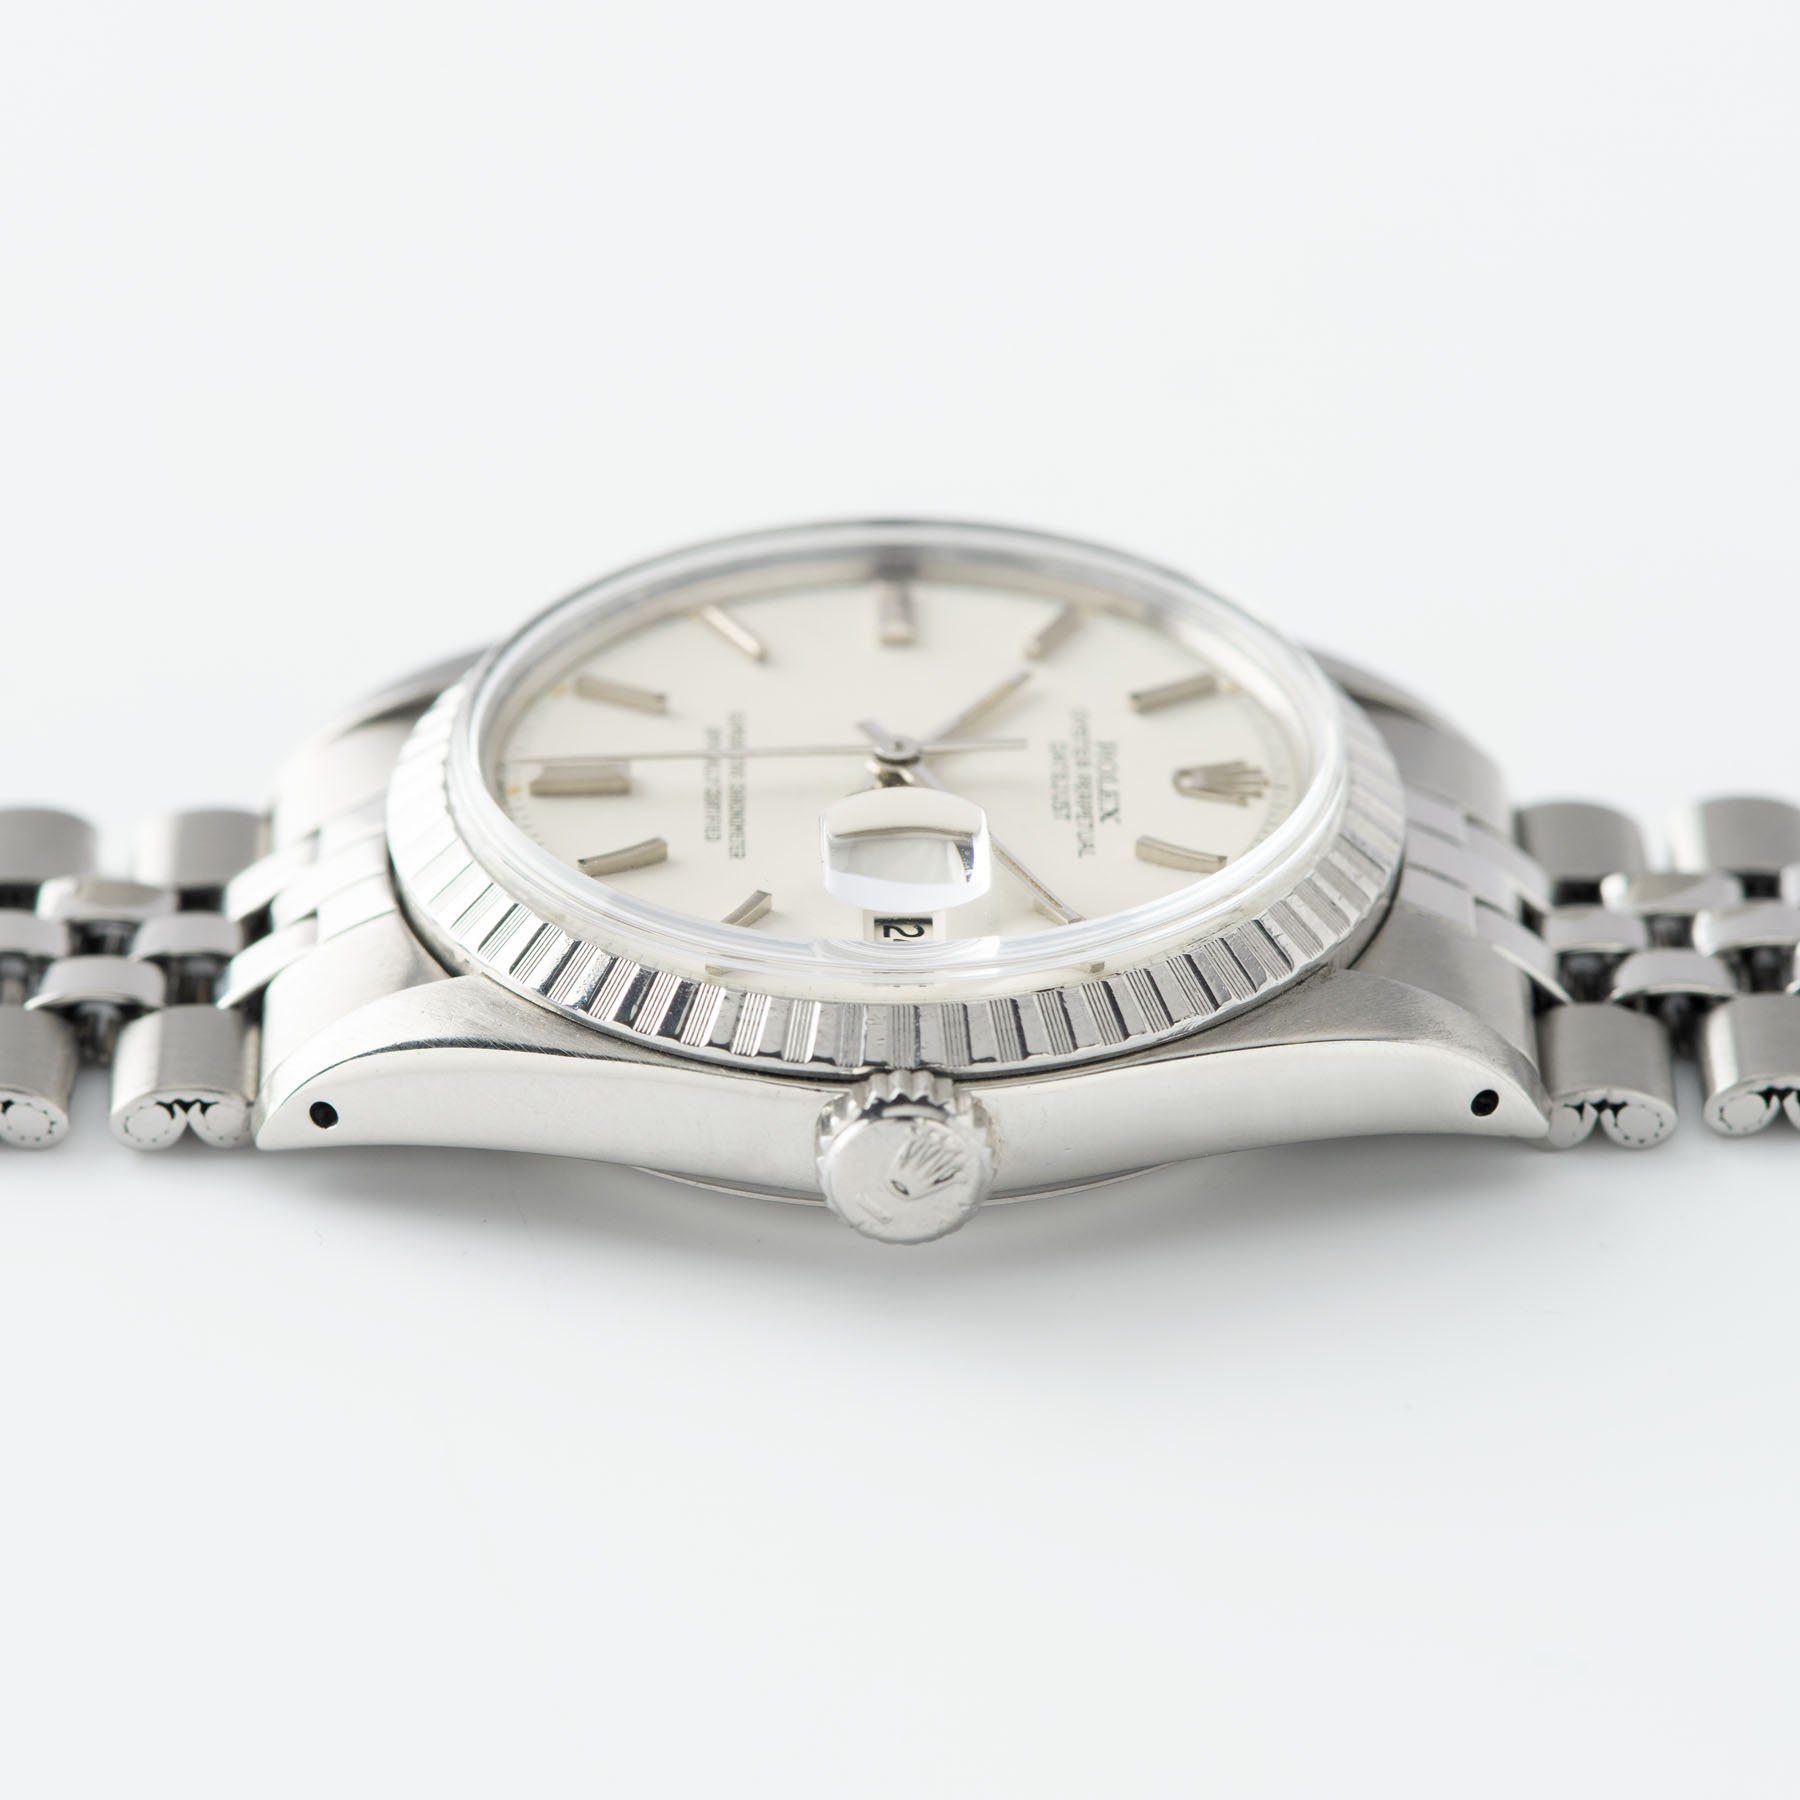 Rolex Datejust White Sigma Dial 1603 with crisp fluted bezel